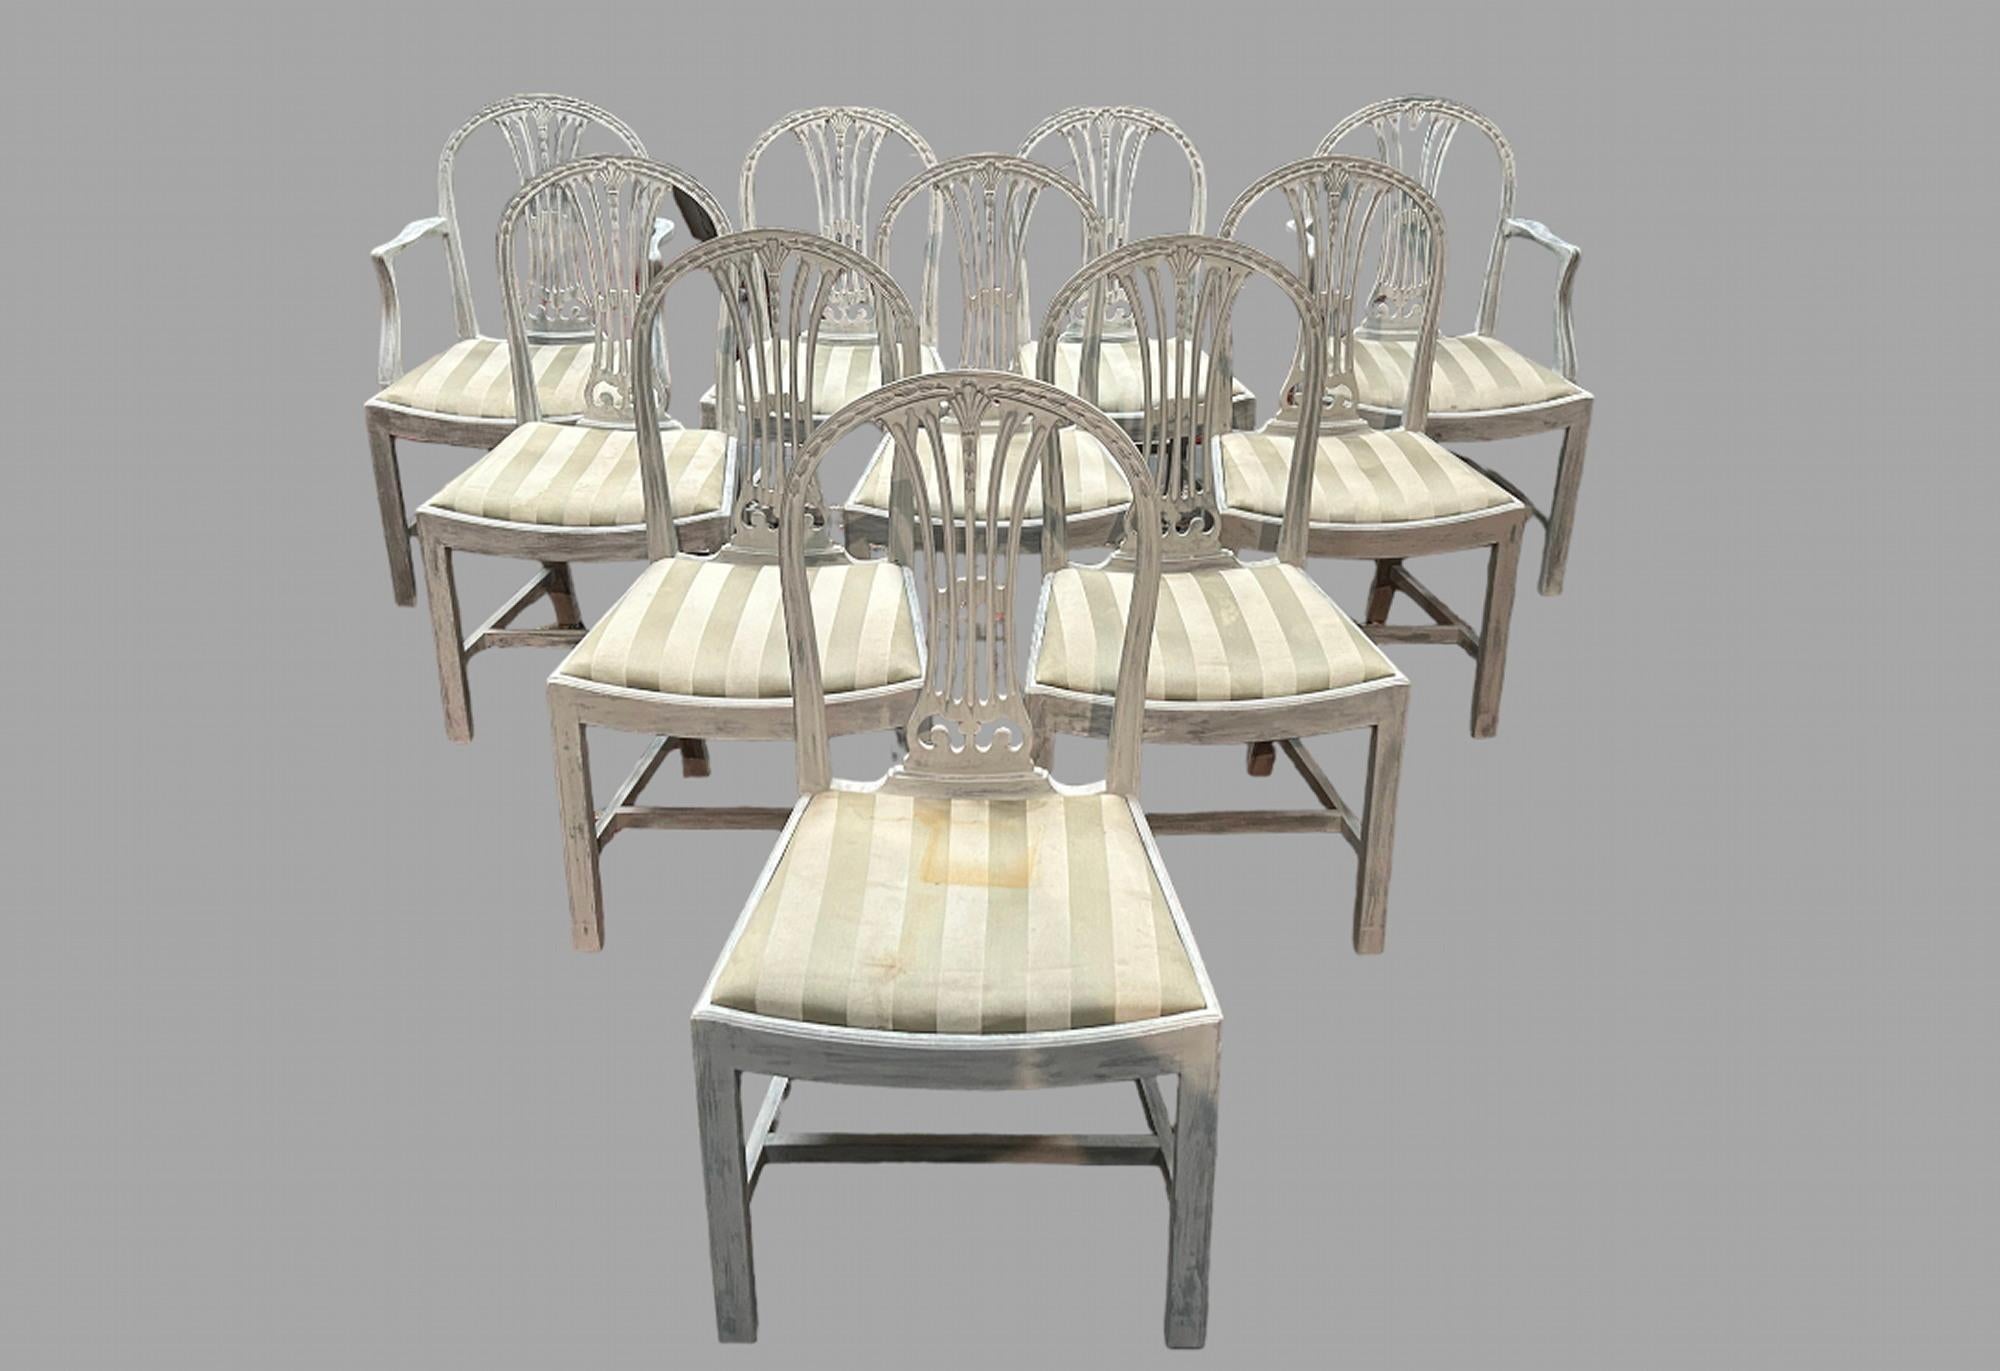 A Set of Ten Painted Mahogany Dining Chairs (8 + 2 Carvers) all in very solid order in Hepplewhite manner c1950, the pop out seats have staining and would benefit from new material to your taste, easier with pop out seats, the back and Slats have